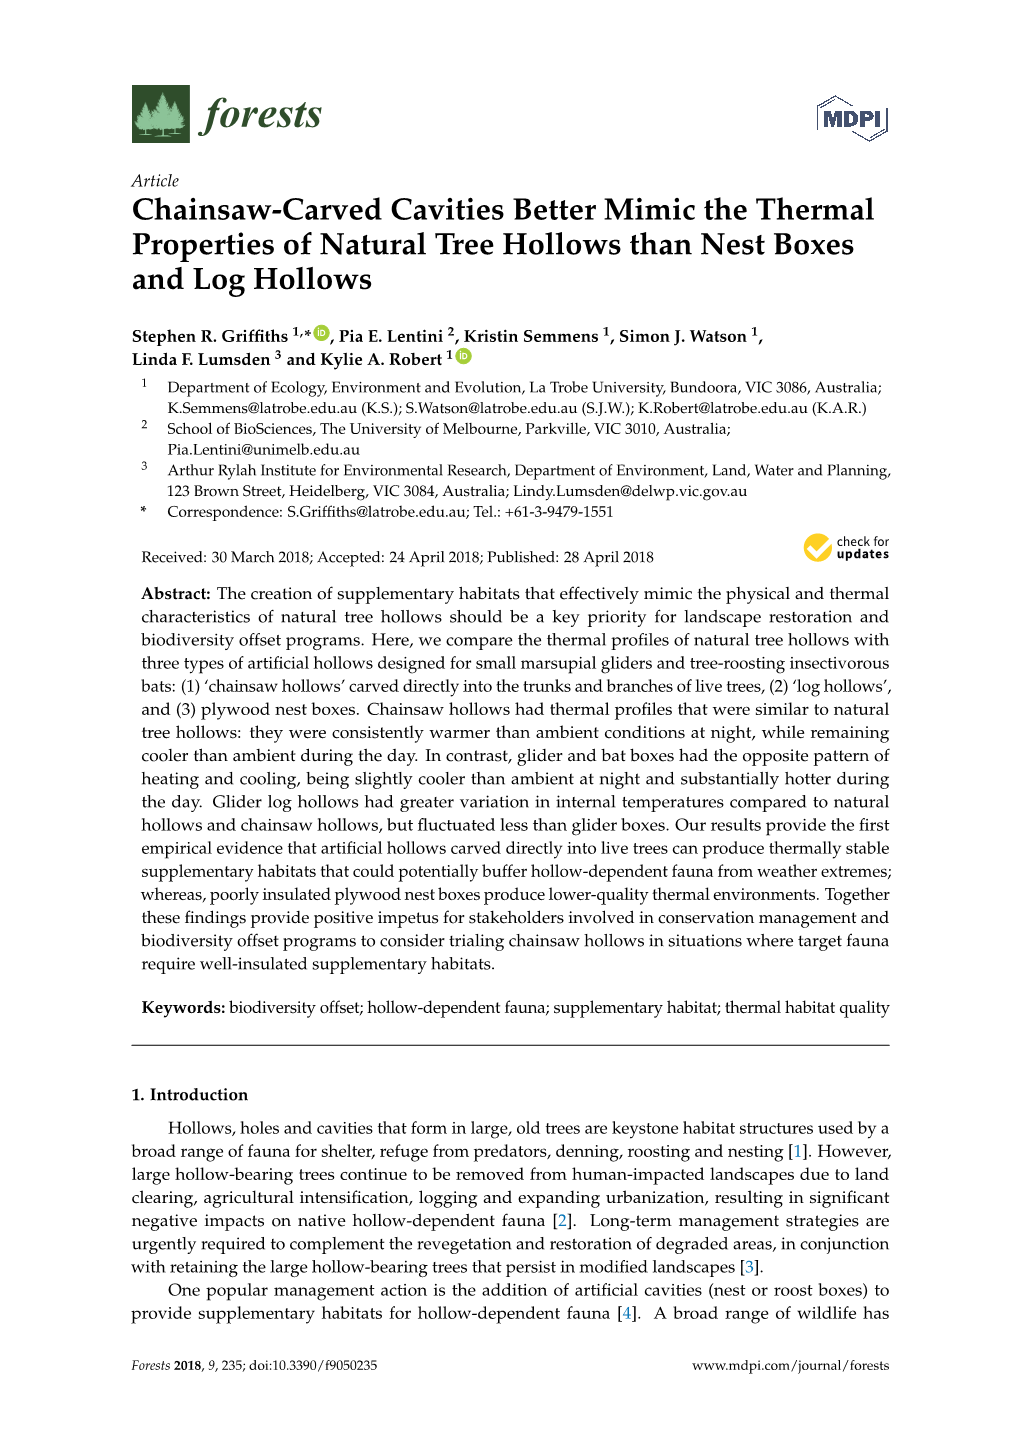 Chainsaw-Carved Cavities Better Mimic the Thermal Properties of Natural Tree Hollows Than Nest Boxes and Log Hollows